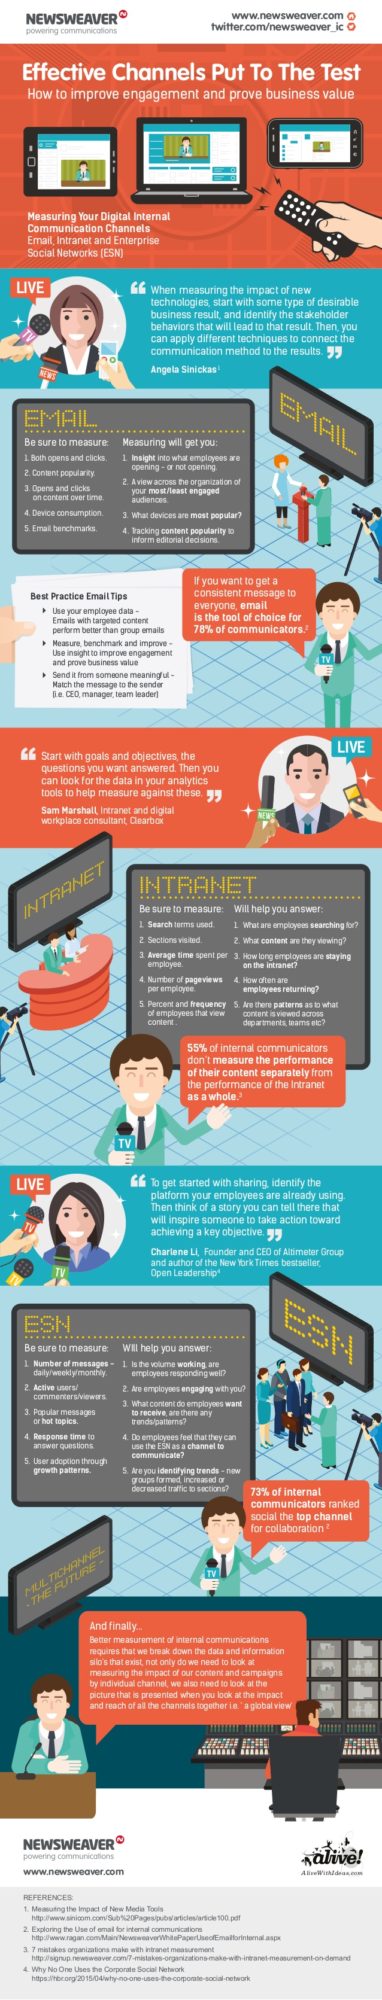 infographic-improve-employee-engagement-with-your-key-communications-1-638